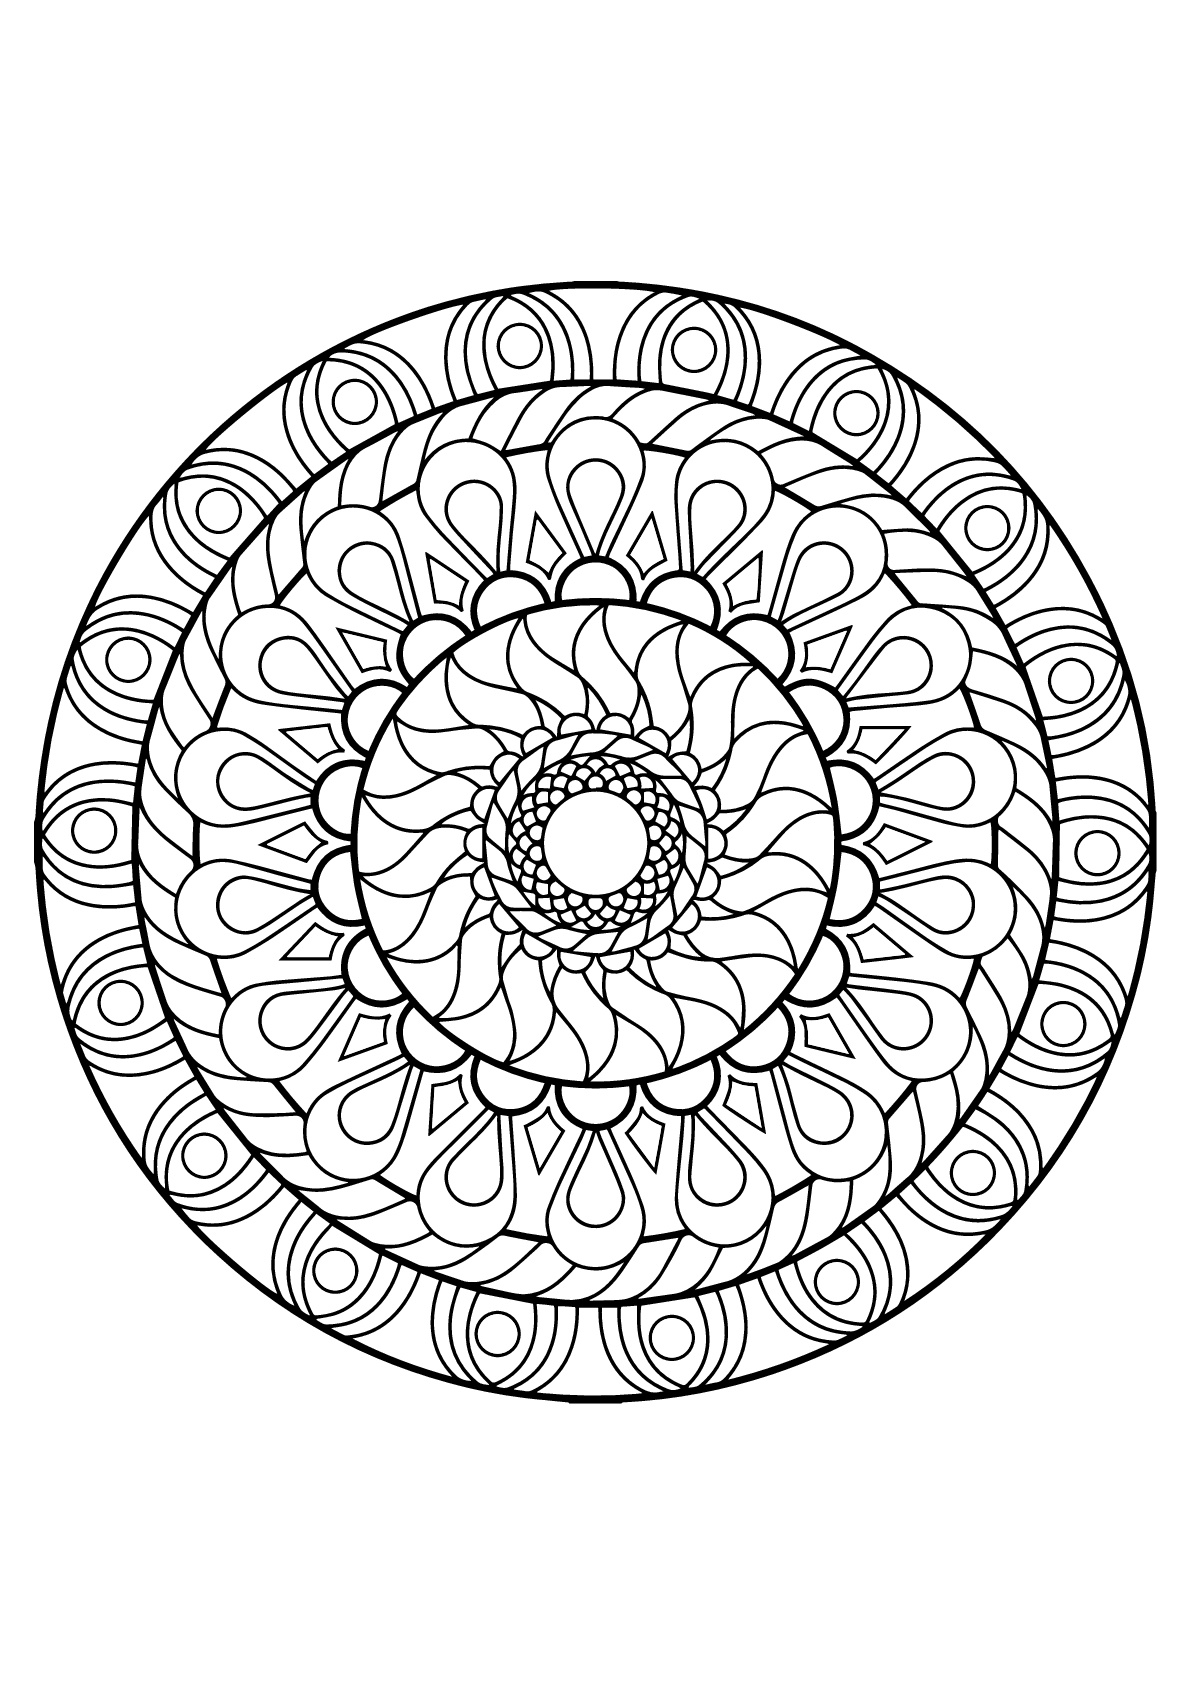 Mandala with various patterns from Free Coloring book for adults